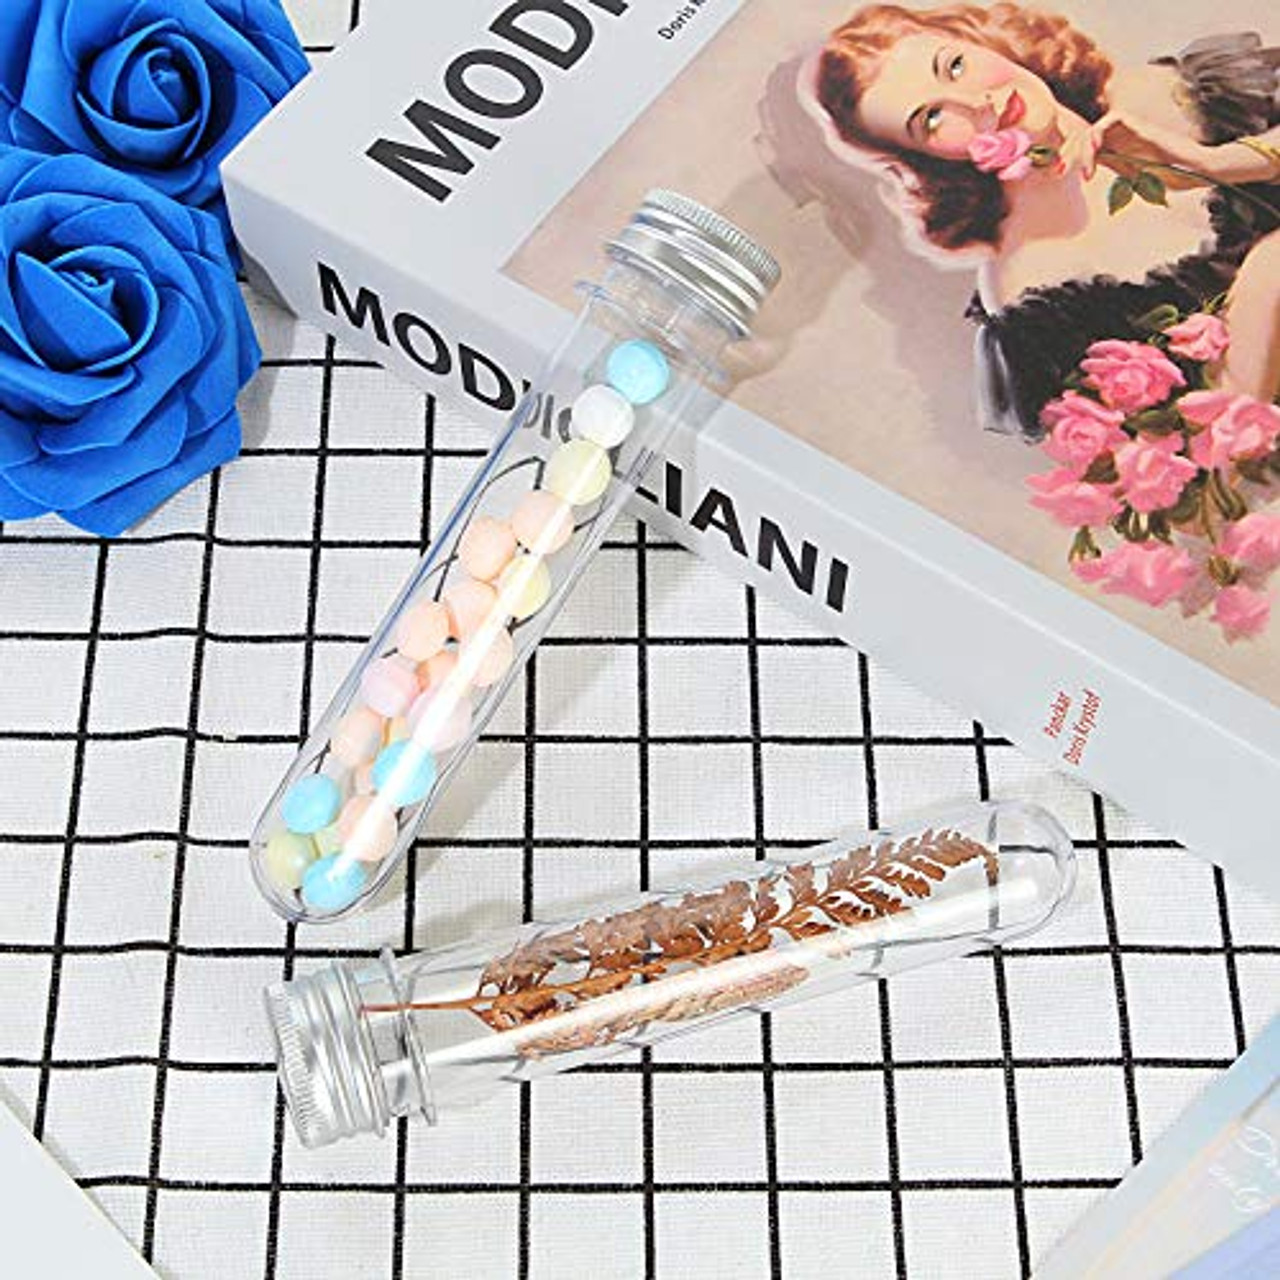 10pcs 115ml Clear Plastic Test Tubes With Caps, Large Test Tube For  Birthday Goodie Bags,Bath Salt, Party Decoration,Candy Storage  Containers,Scientific Experiments,Scented Tea Bottle